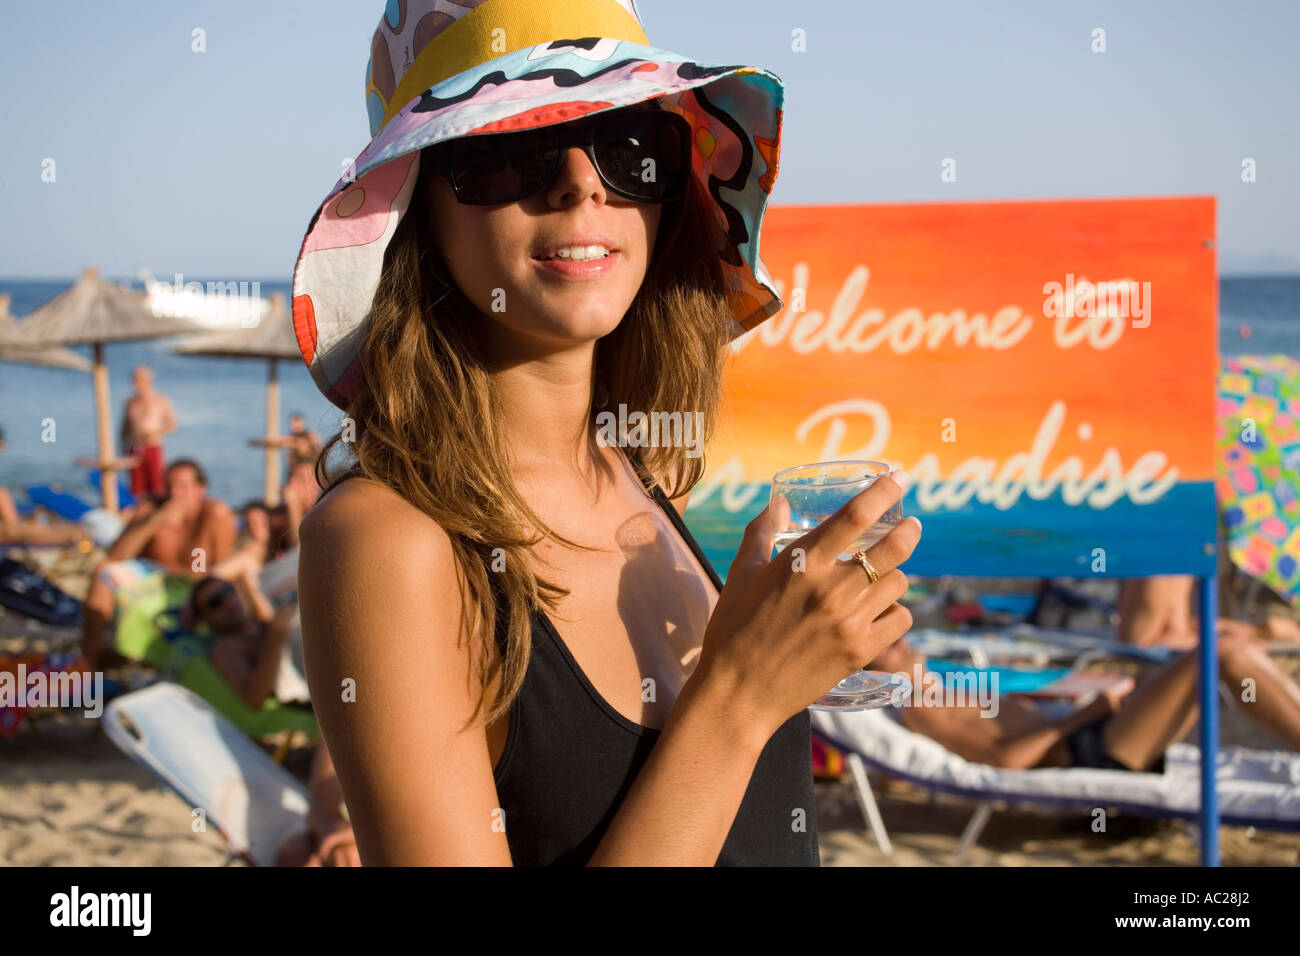 Woman with sunglasses and crazy hat holding a glass of water knowing as a centrum of gays and nudism Psarou Mykonos Greece Stock Photo